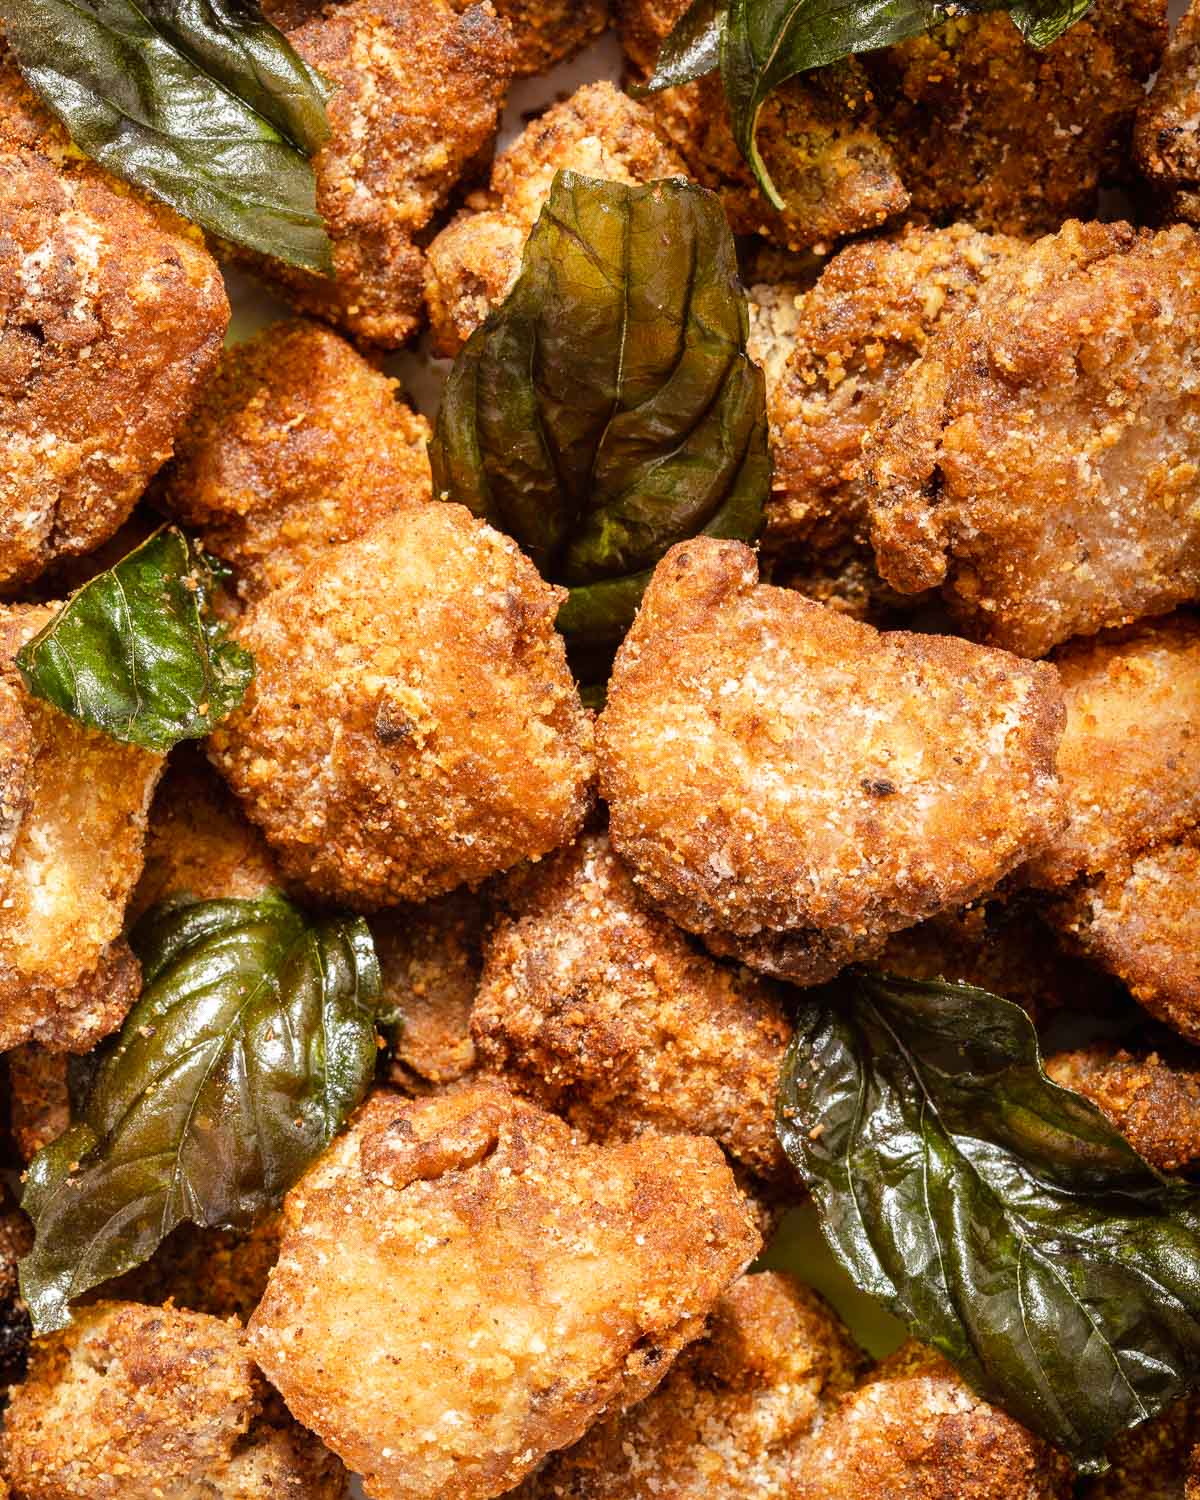 A detail shot Taiwanese fried Chicken tossed with fried basil.